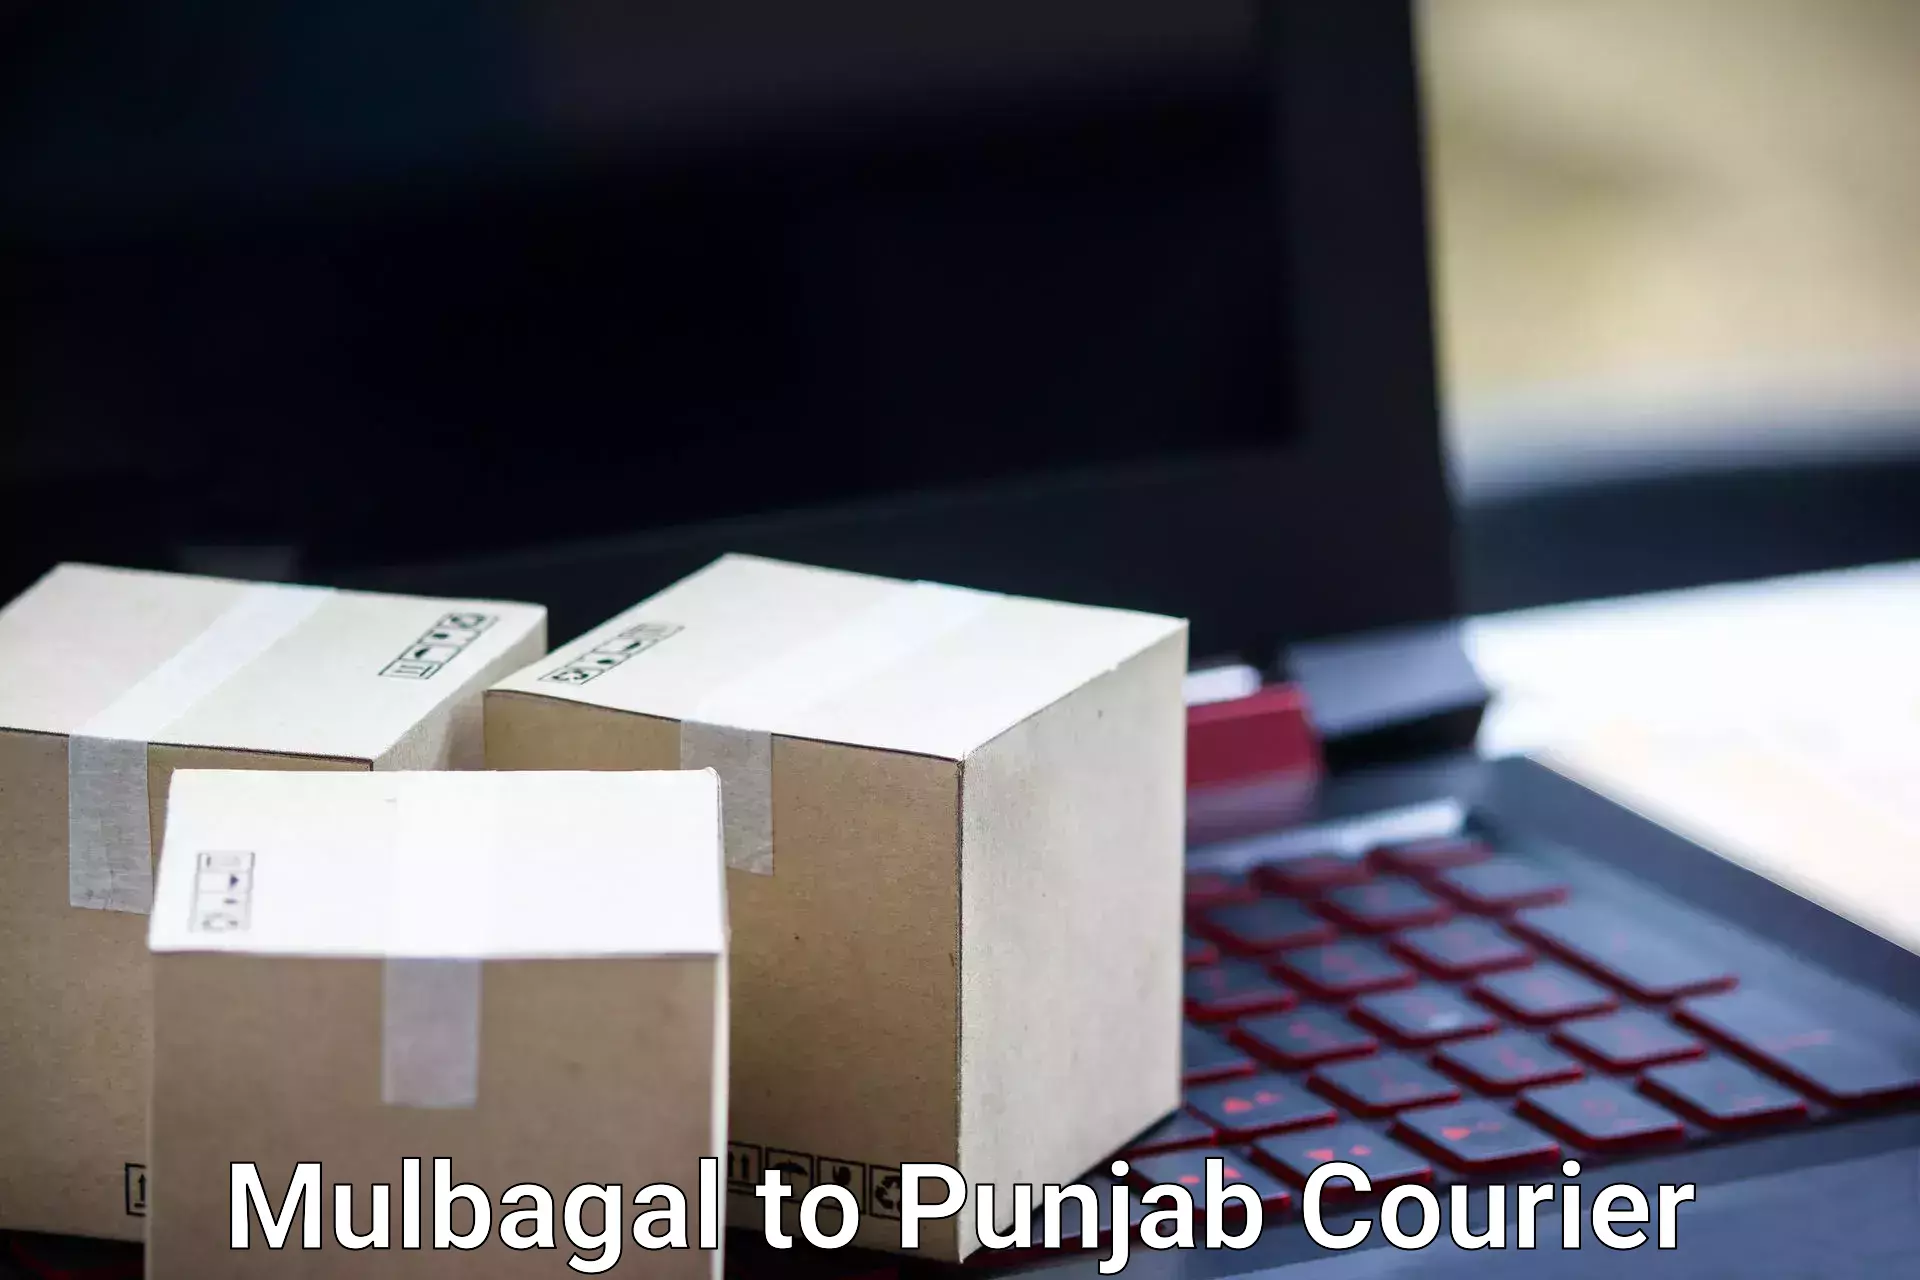 Personal effects shipping in Mulbagal to Amritsar